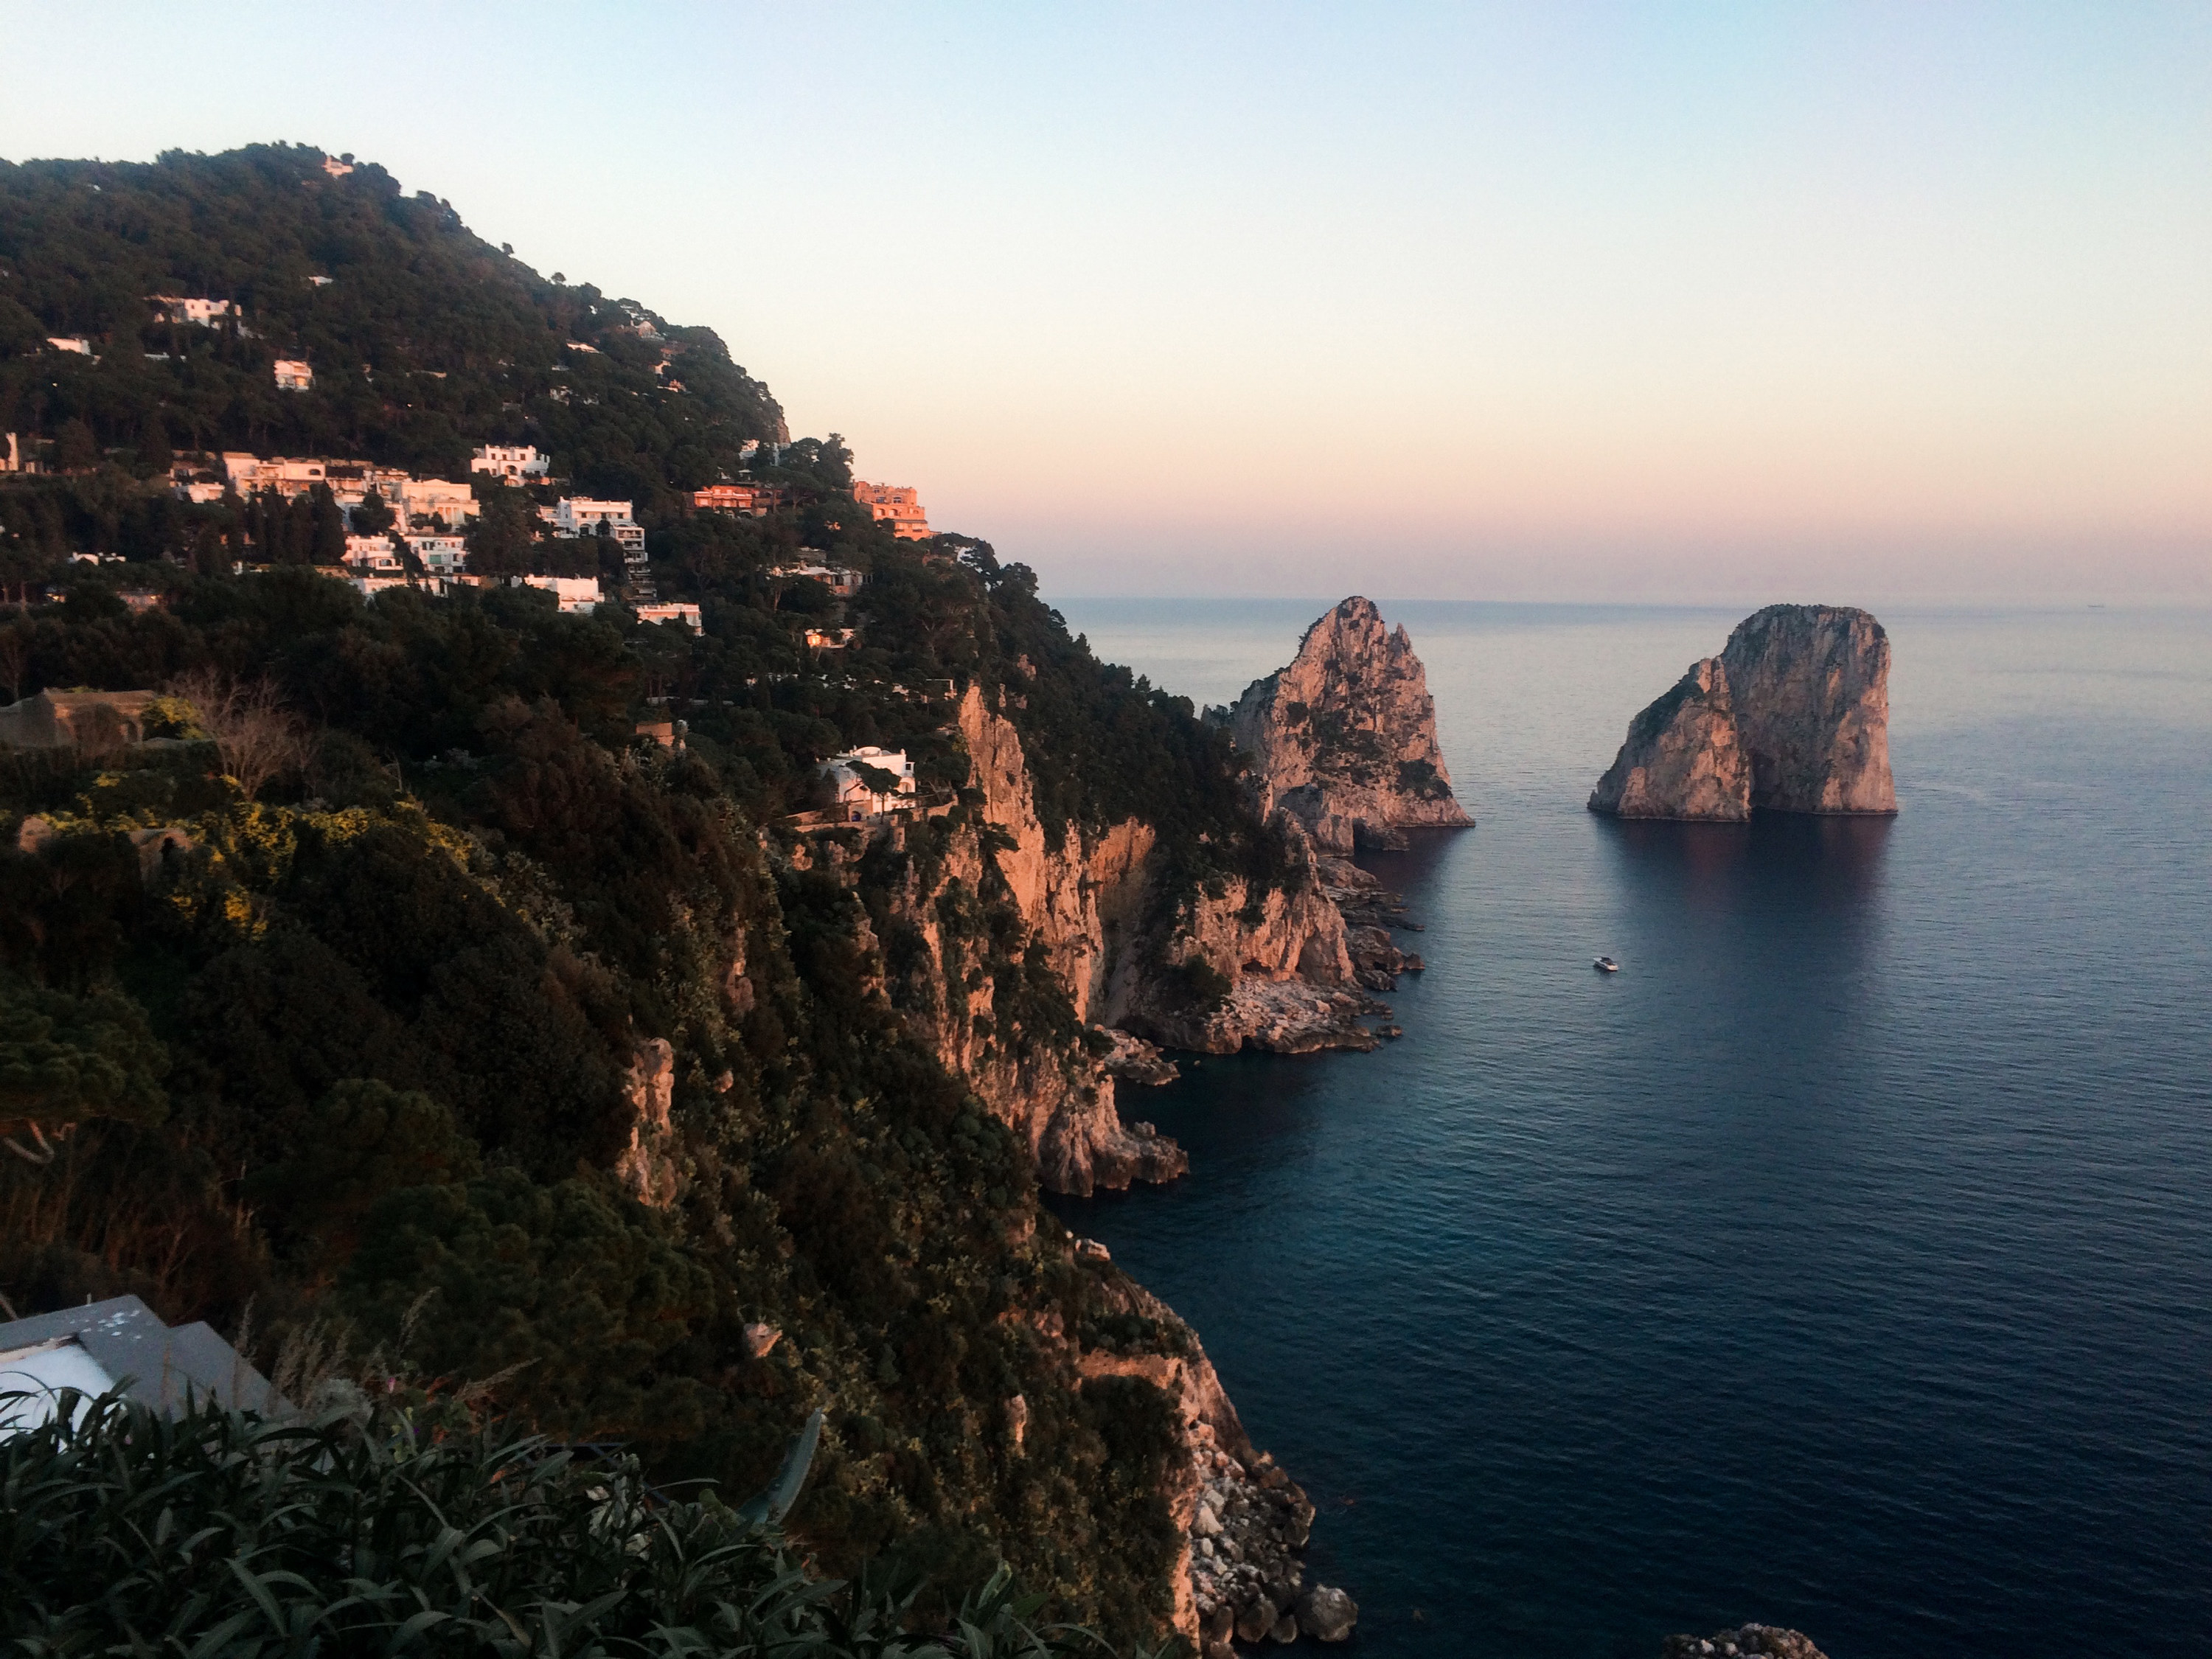 Island of Capri with view of the sea and rock formations